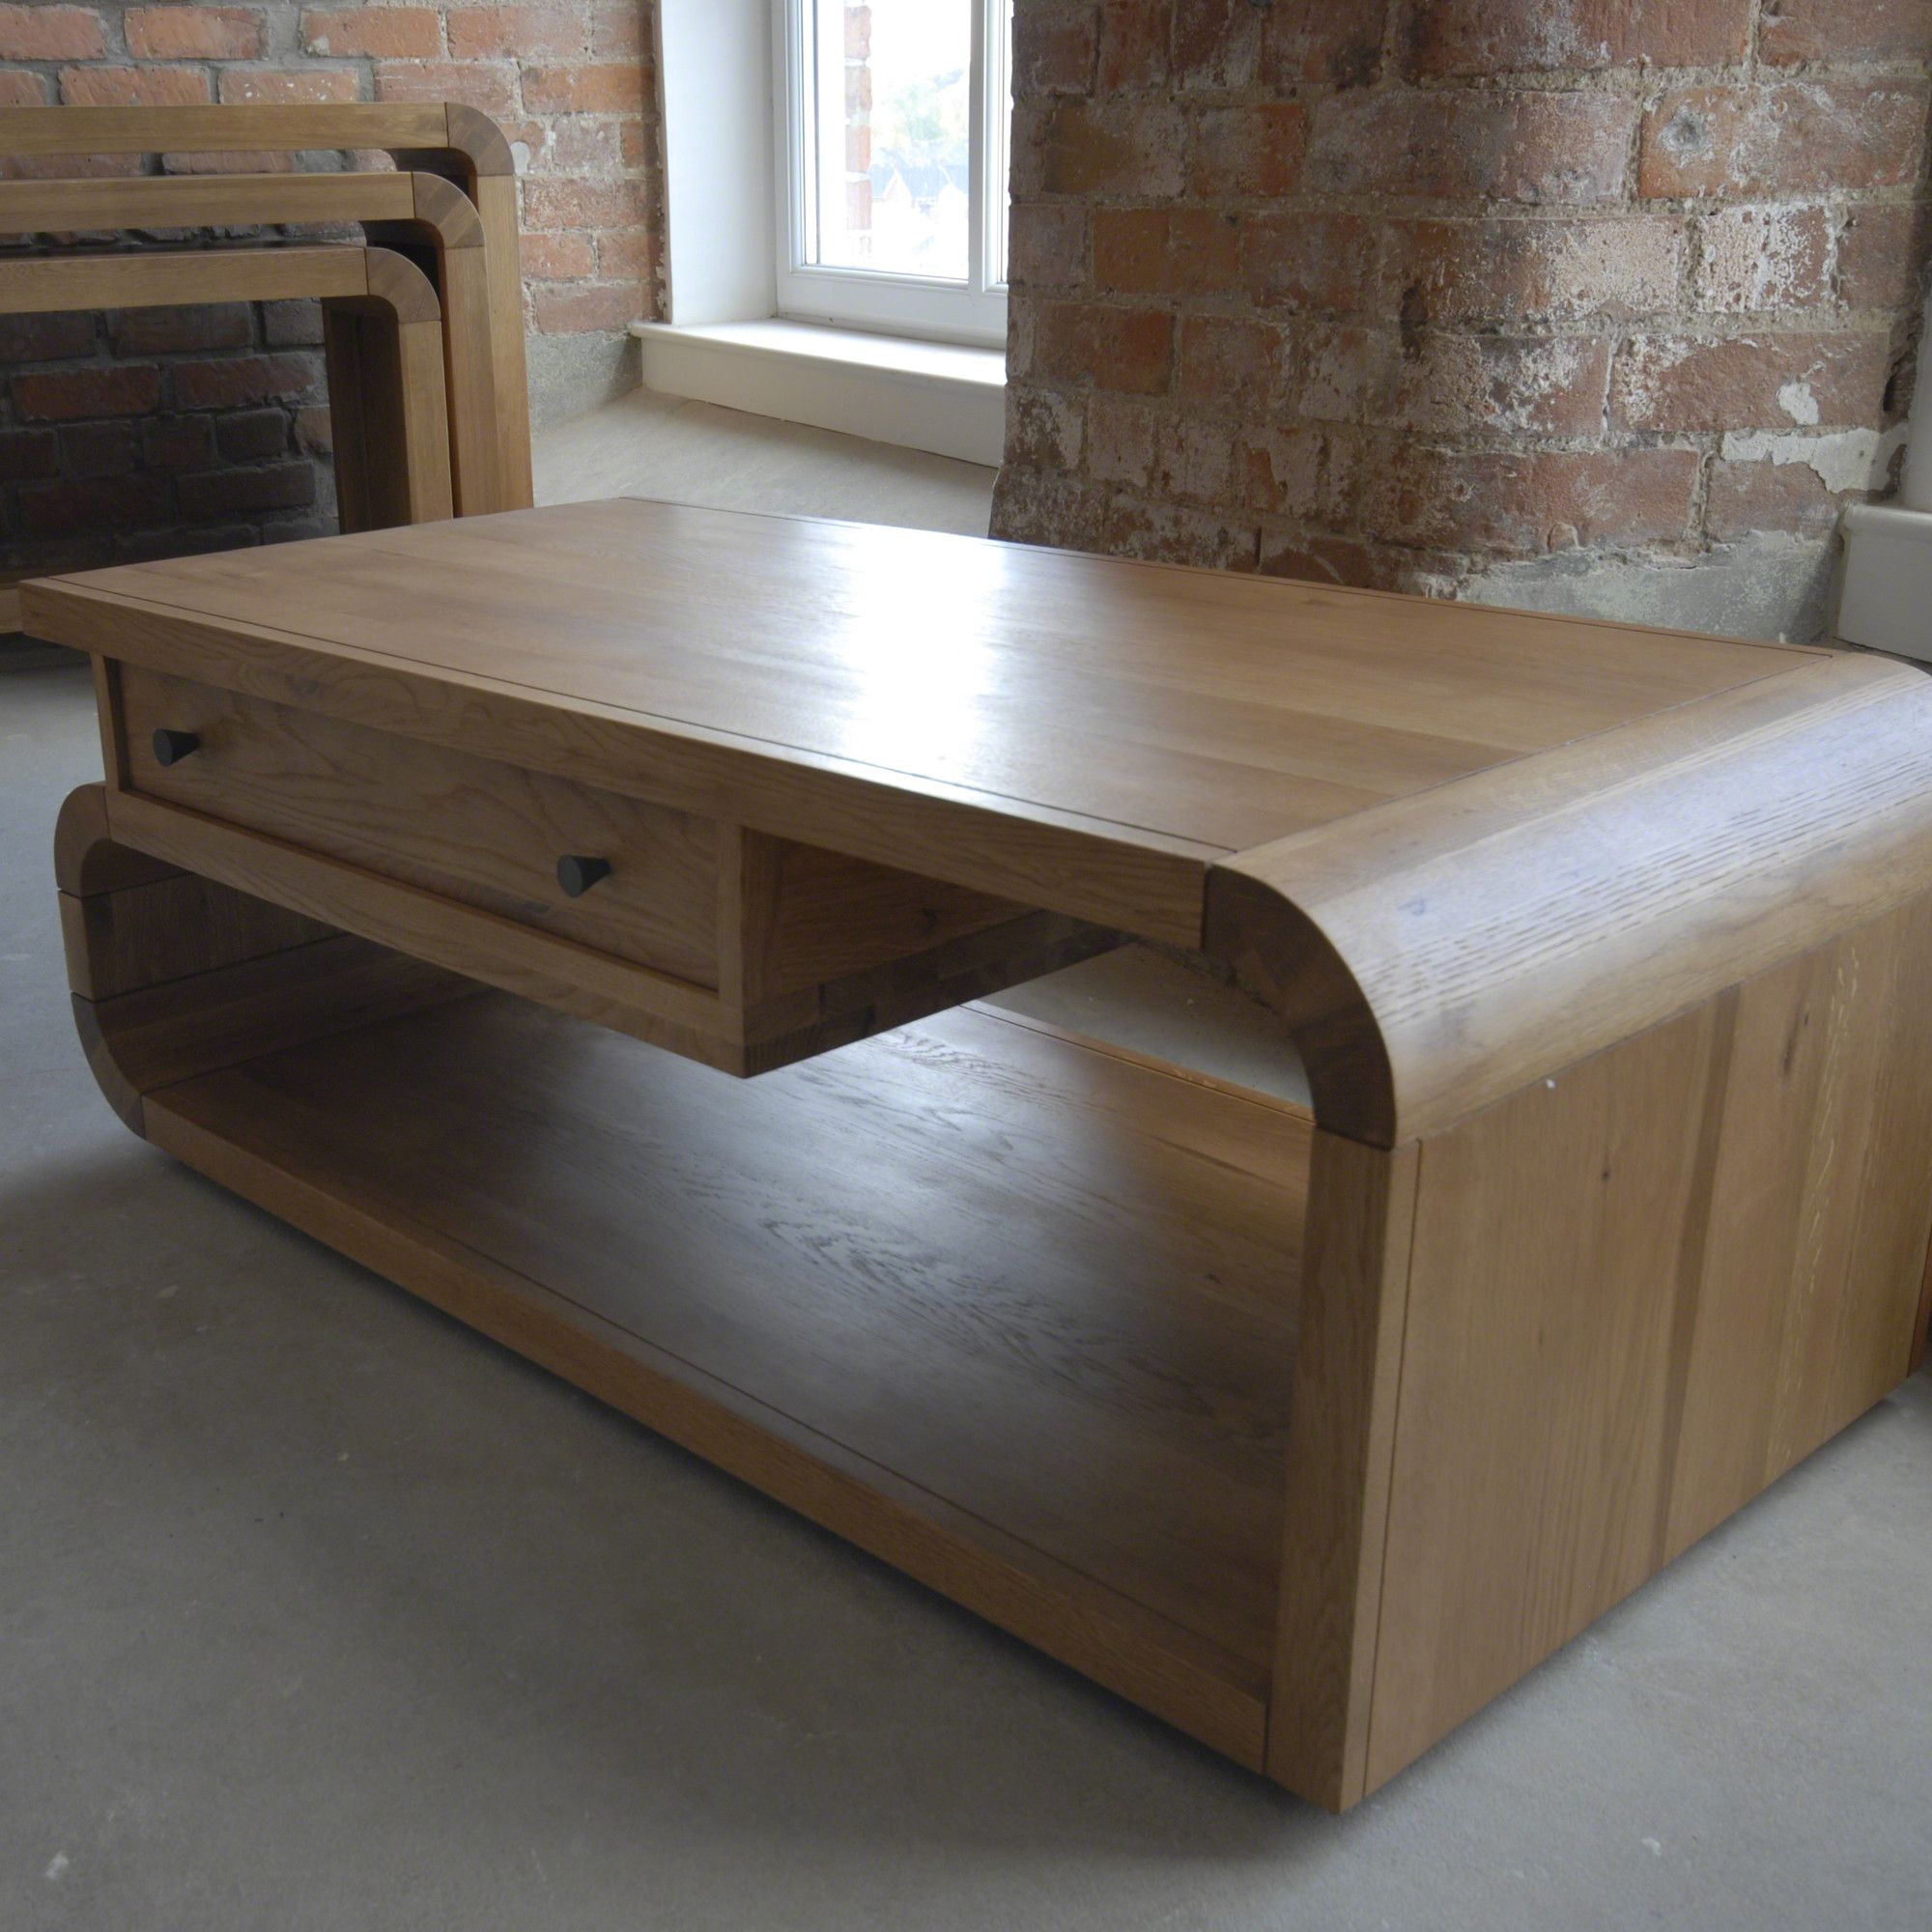 Oceans Apart Cadence Oak Living Coffee Table W/ Drawer at Tesco Direct